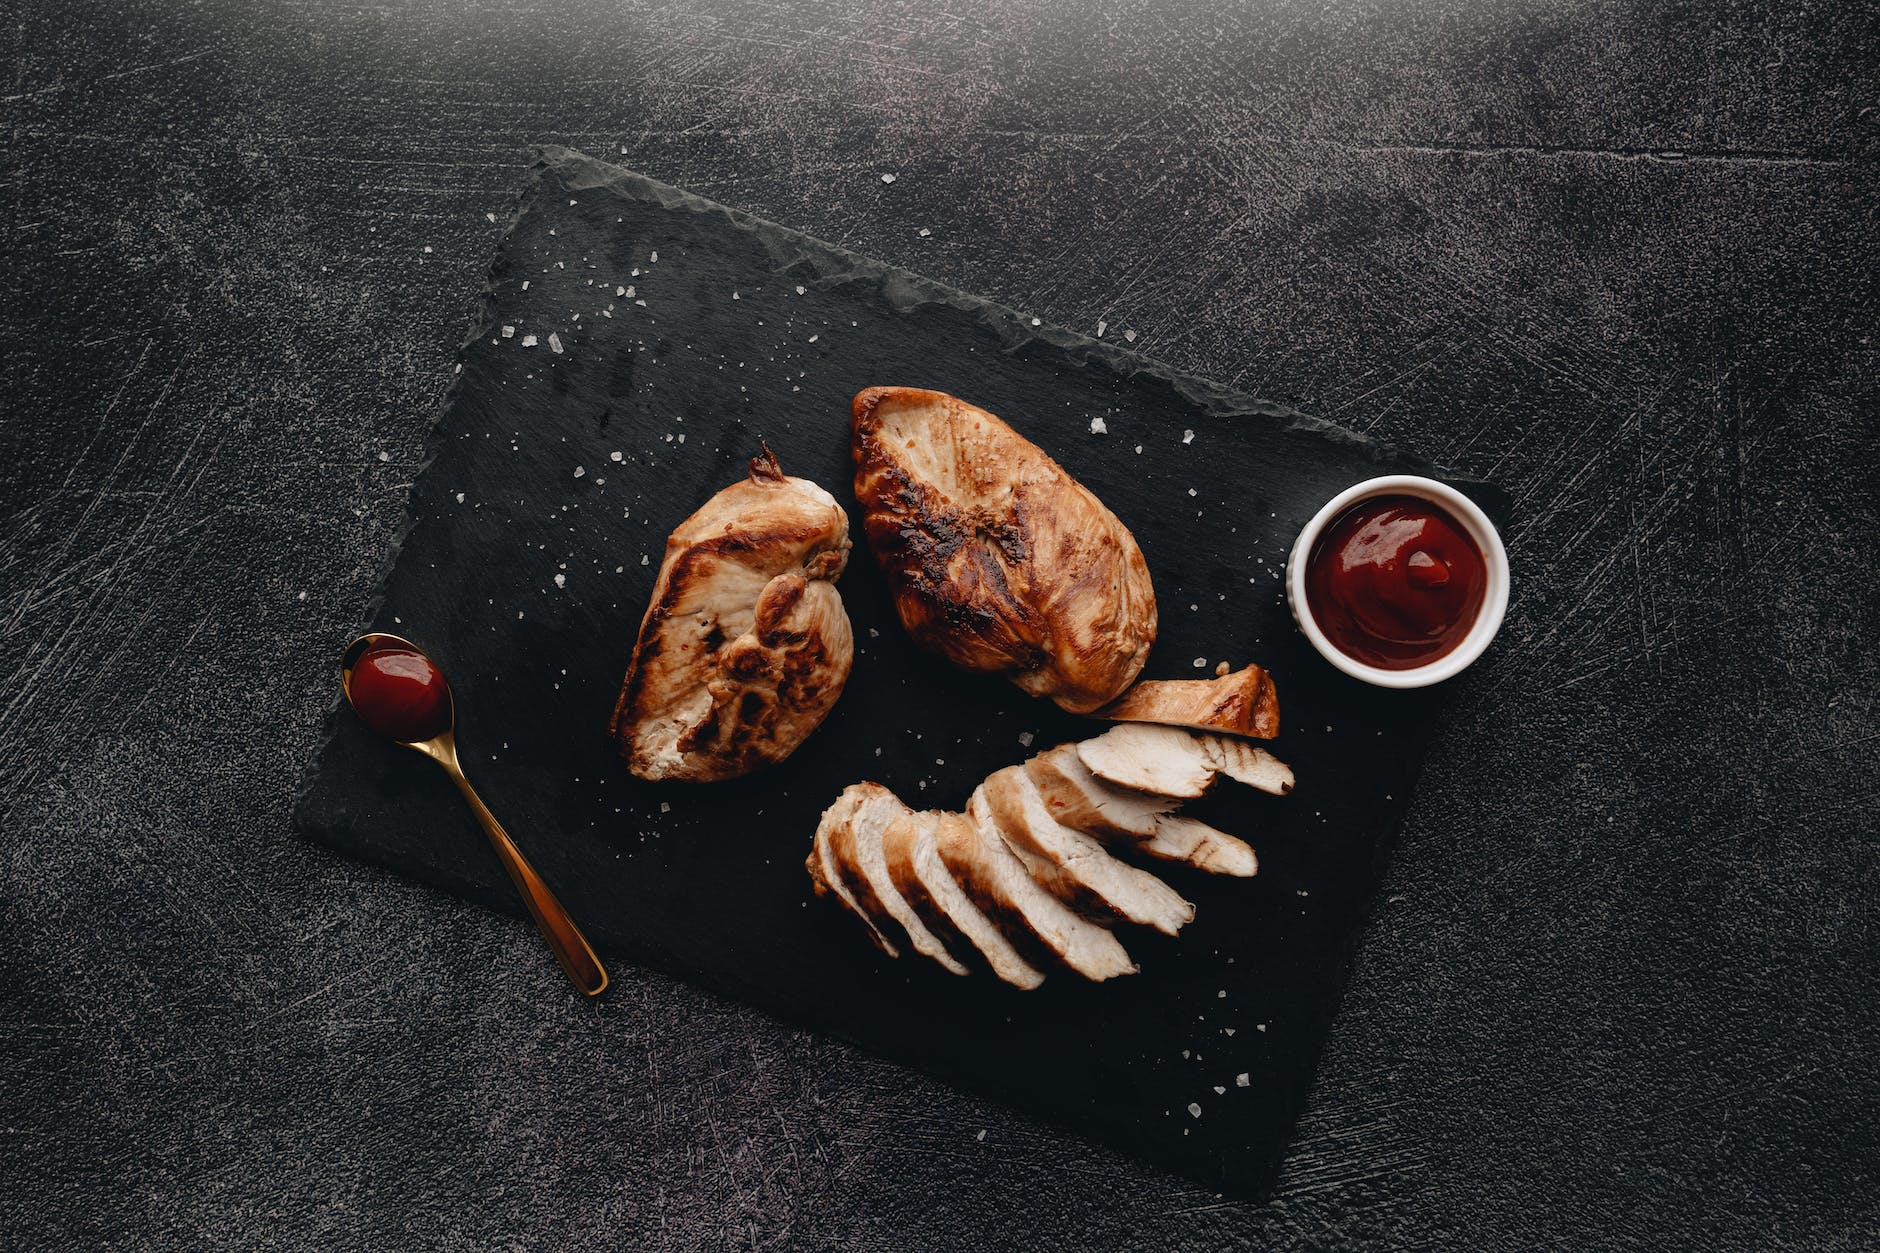 Photo by alleksana on <a href="https://www.pexels.com/photo/roasted-chicken-breasts-with-sauce-on-the-side-6107756/" rel="nofollow">Pexels.com</a>